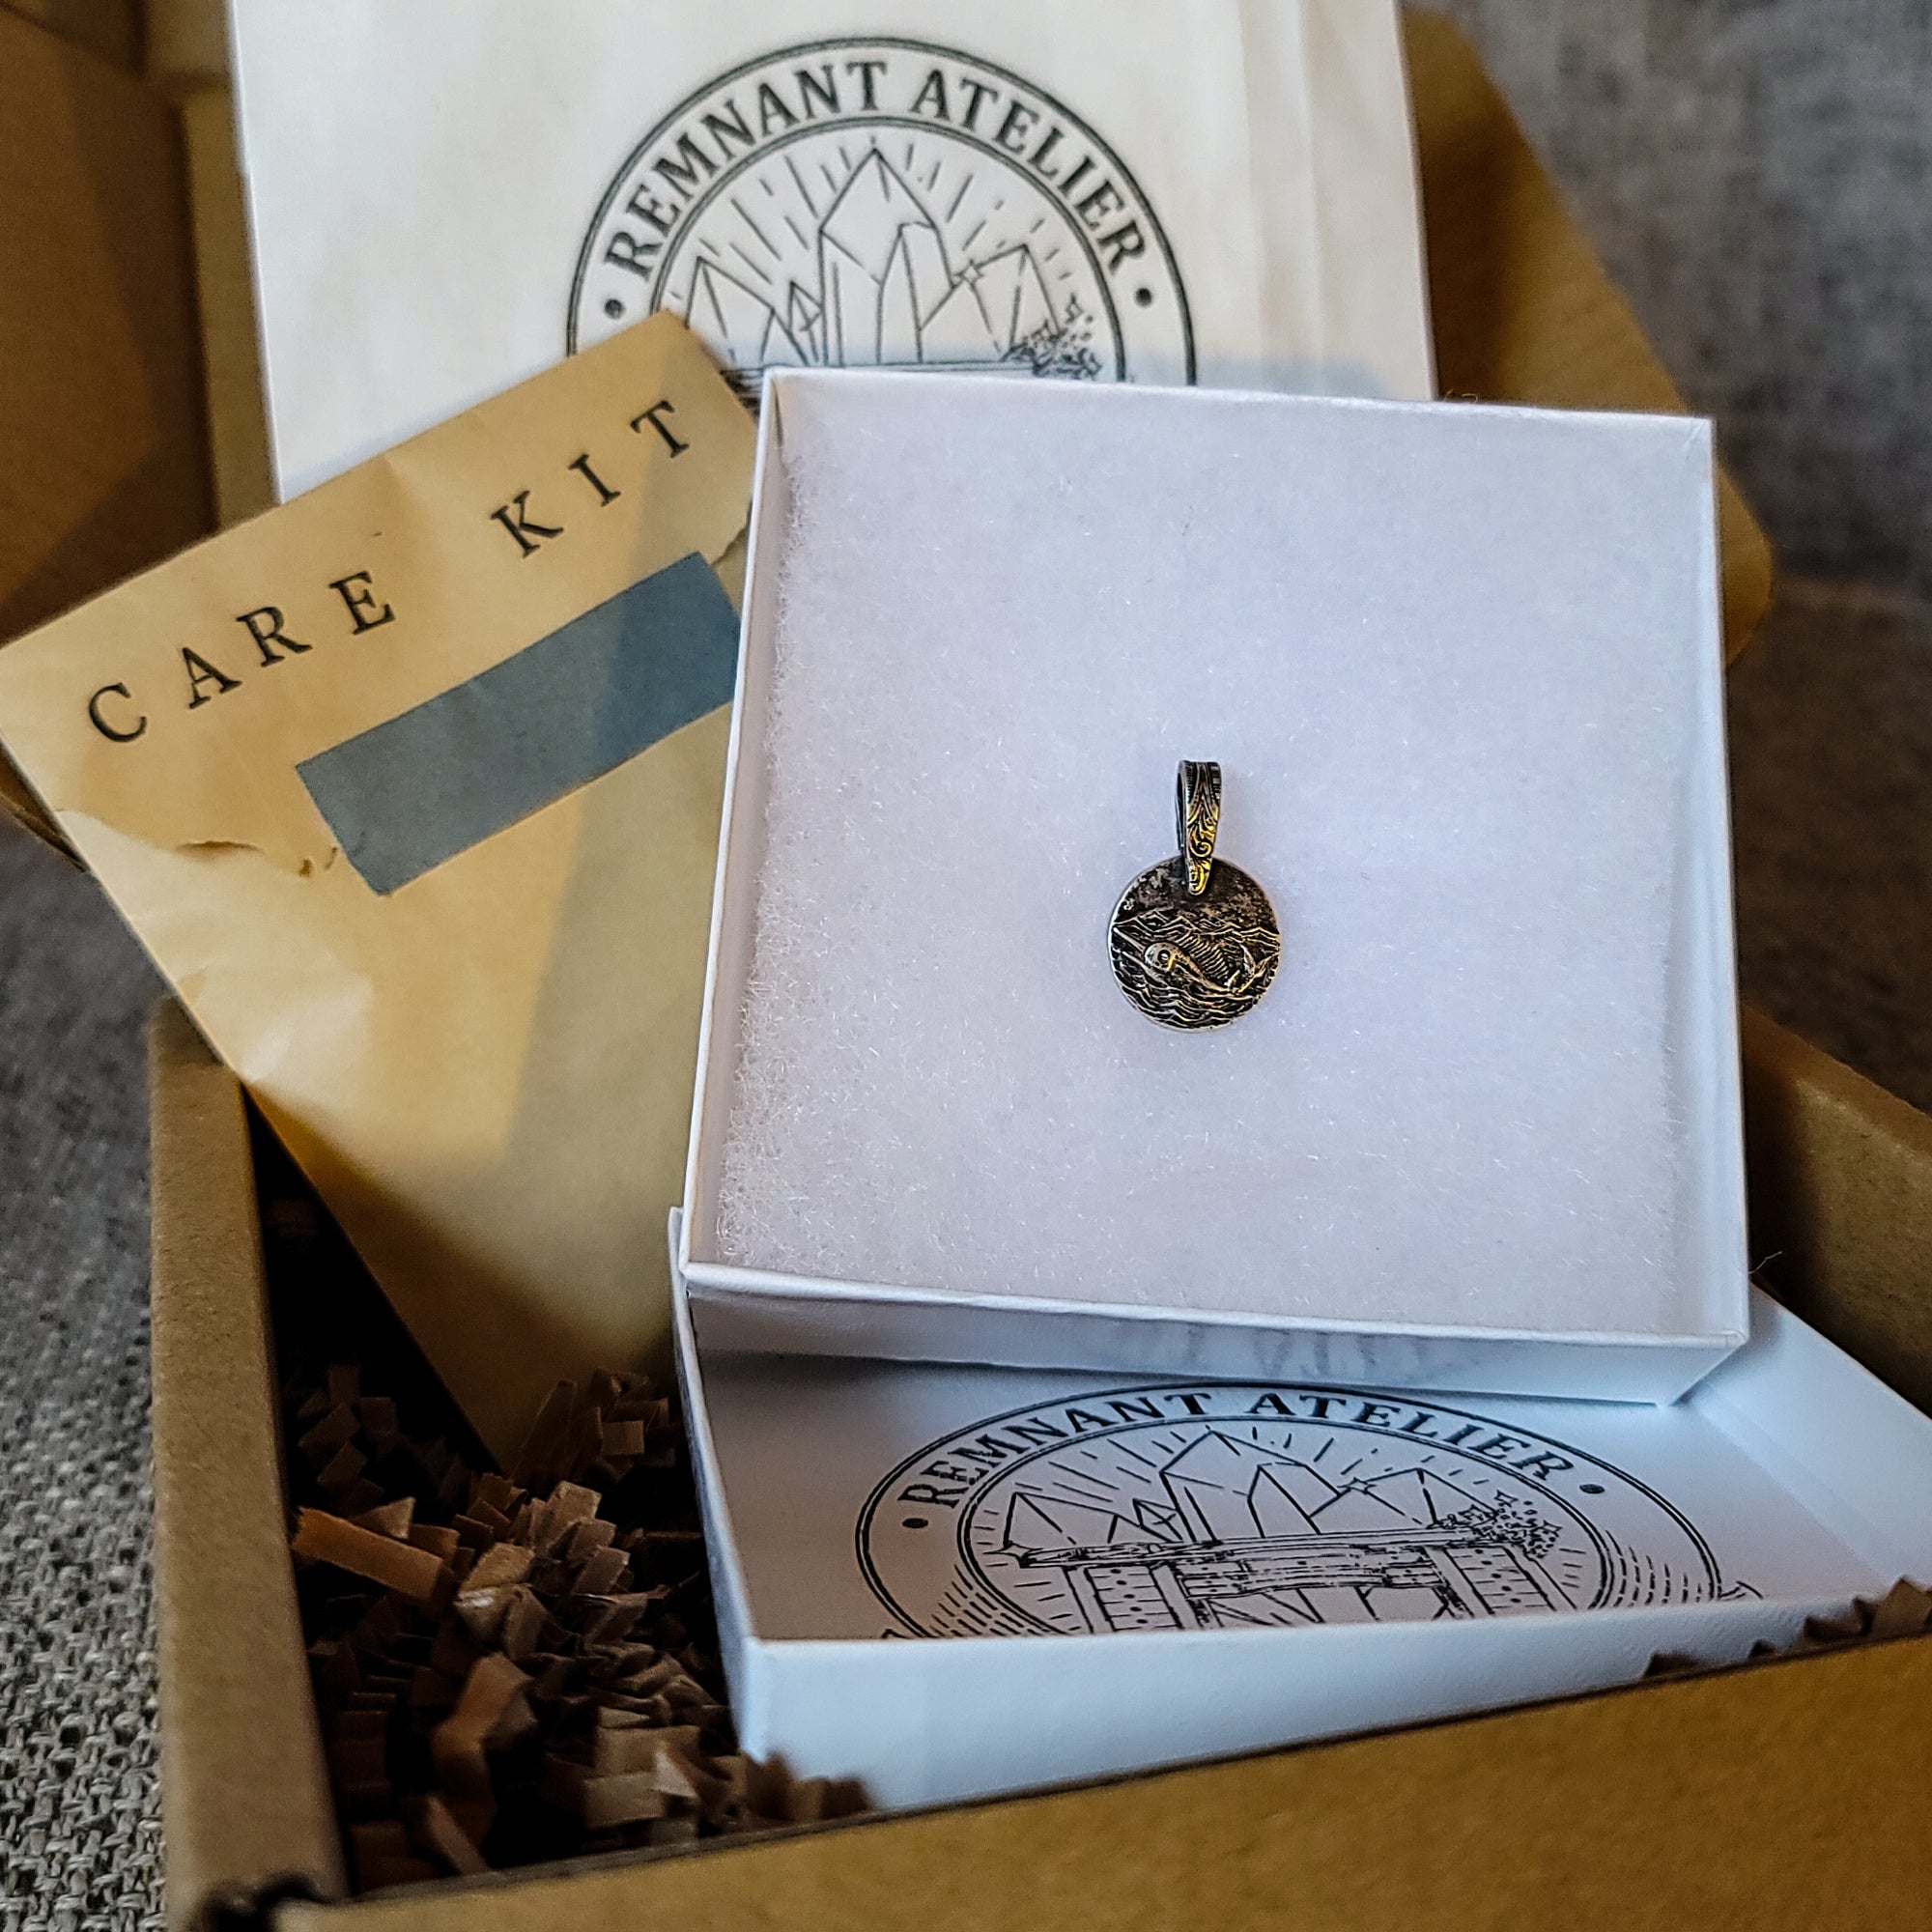 This photo shows a handmade sterling silver pendant featuring a swordfish swimming in the ocean. The pendant is placed inside a white gift box placed inside a cardboard box. The package also includes a care kit to keep the jewelry in top condition.